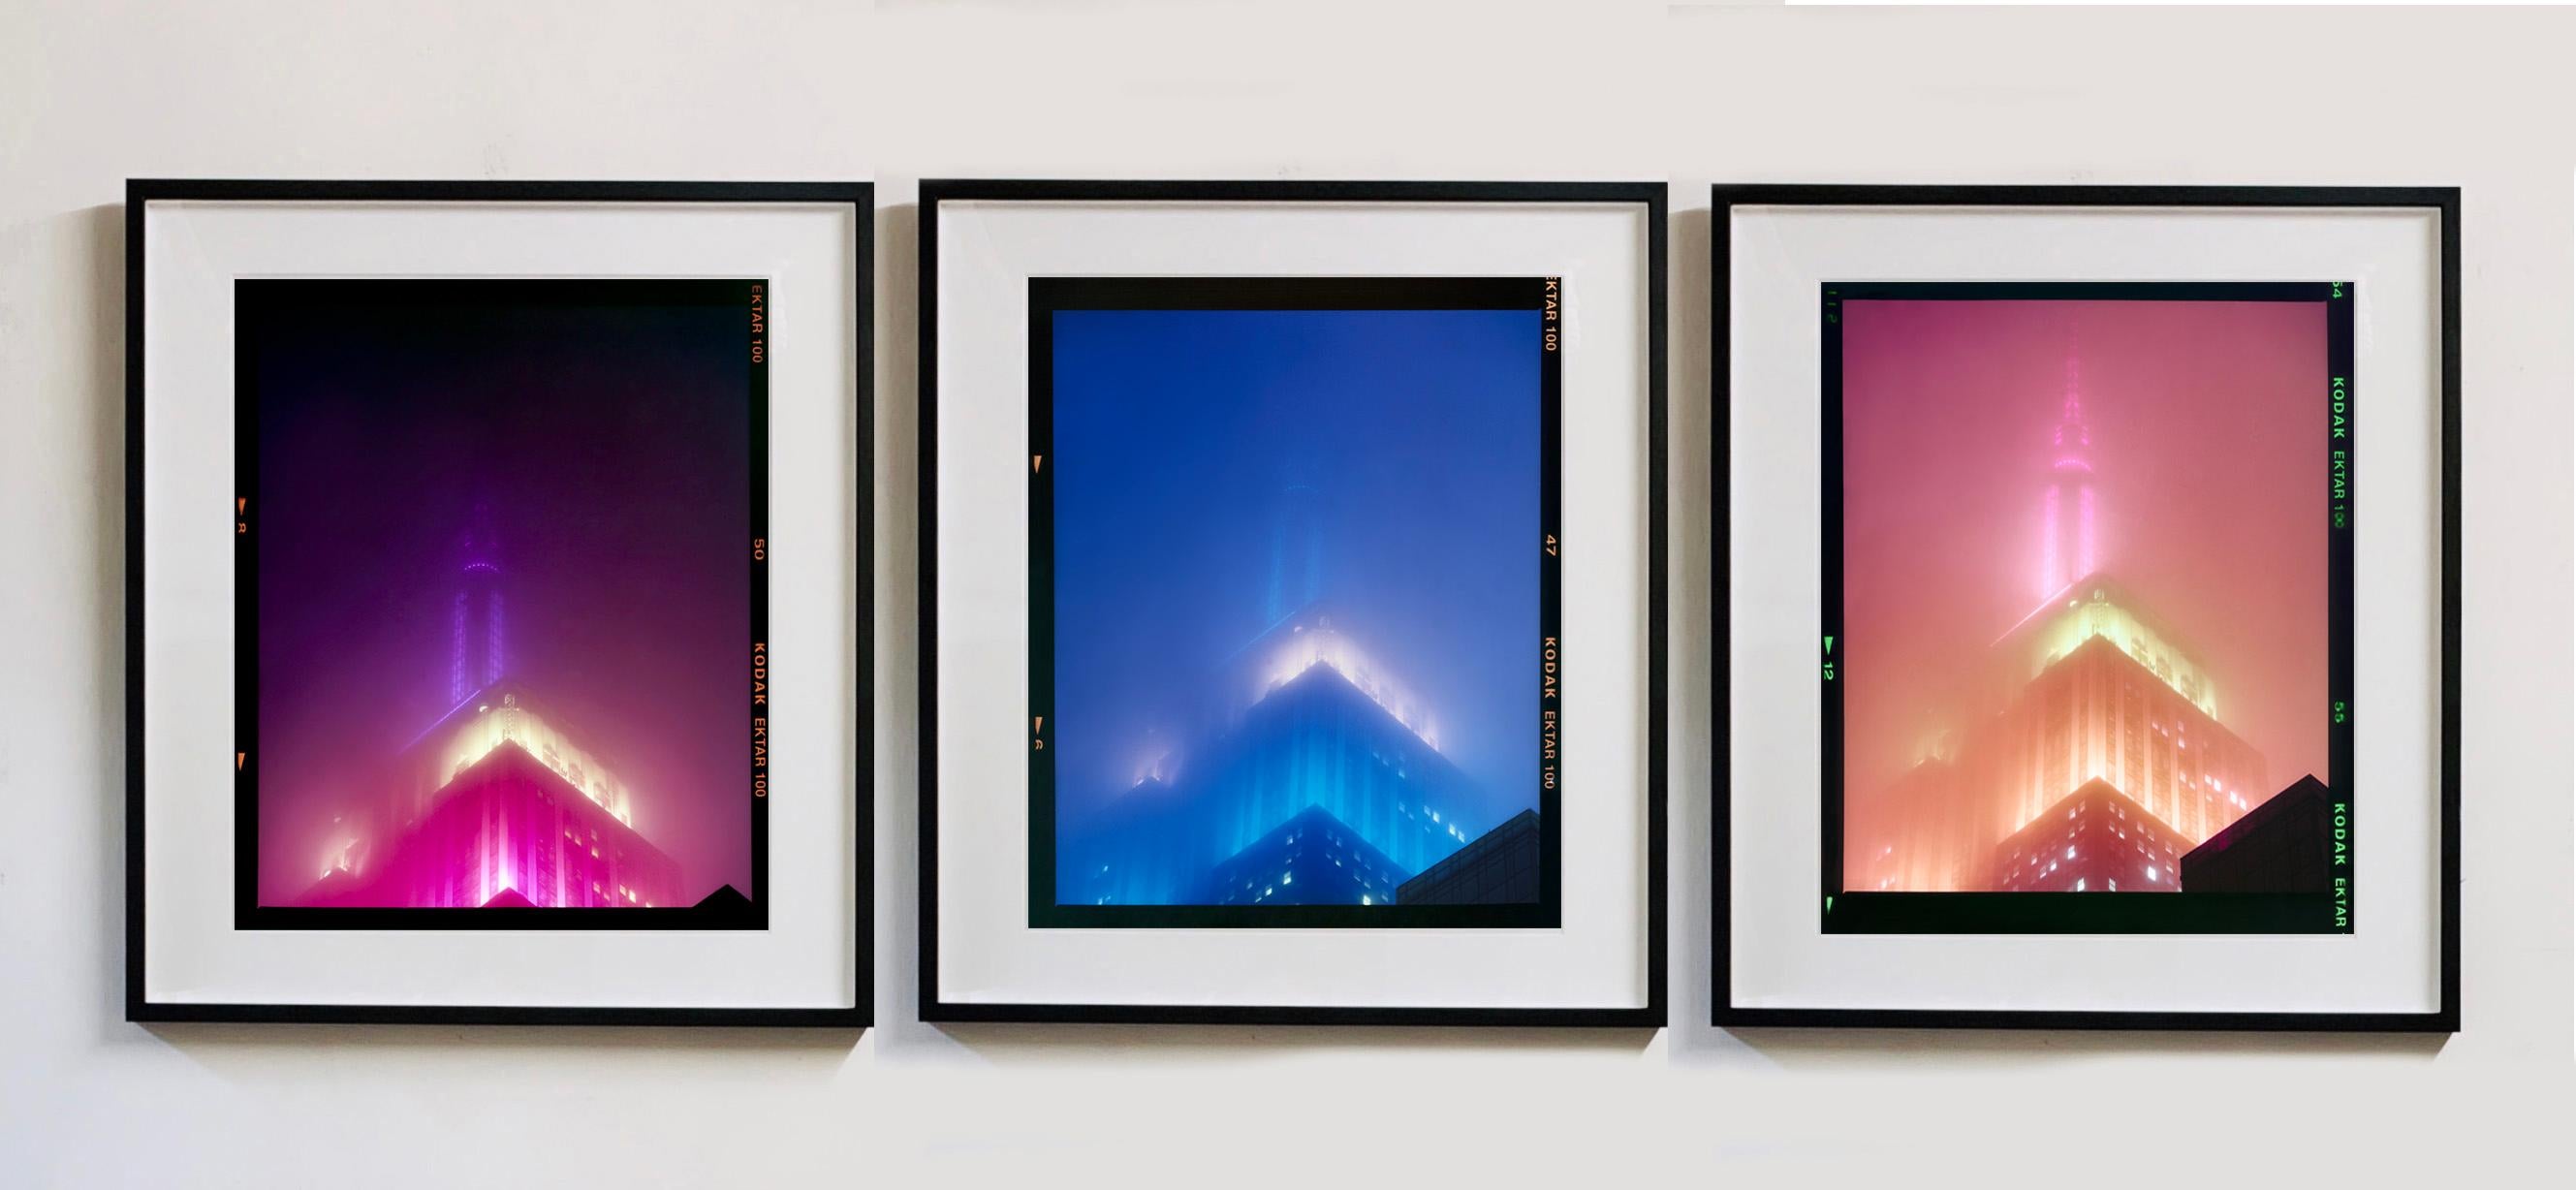 'NOMAD II (Film Rebate)', New York. Richard Heeps has photographed the iconic Empire State building in the mist. The NOMAD sequence of photographs capture the art deco architecture illuminated by changing colours, and is part of Richard's street